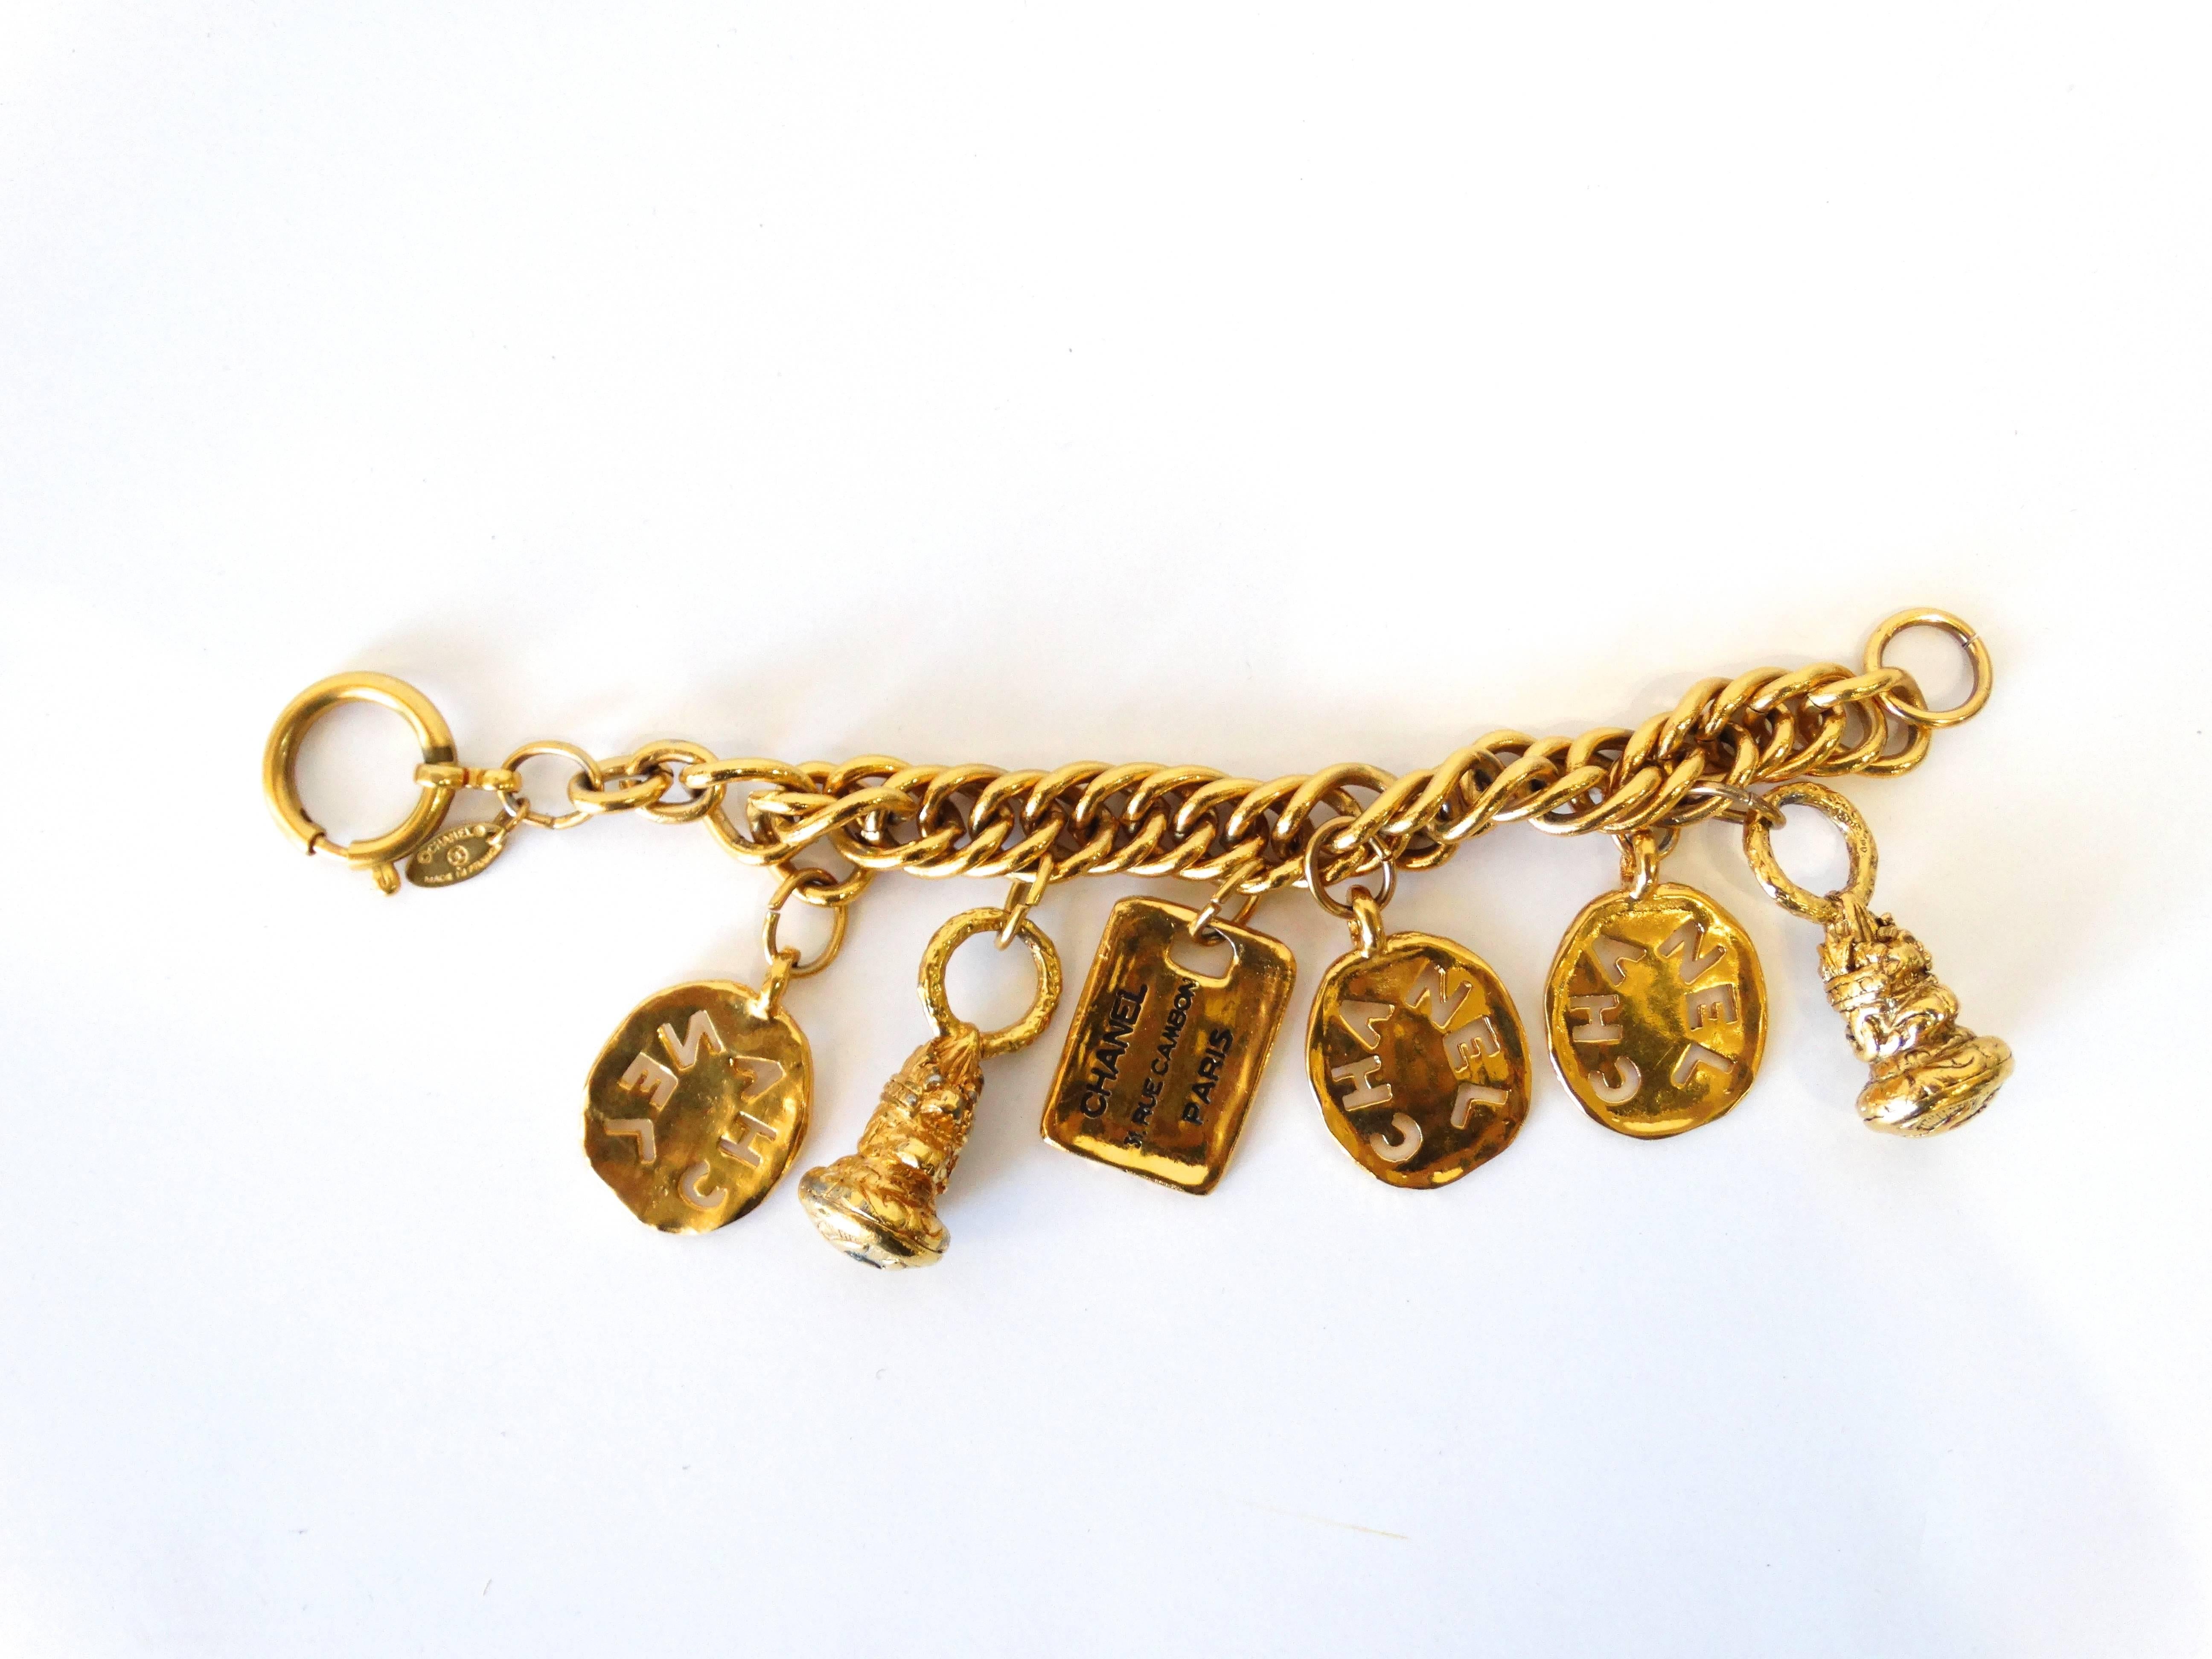 Get charmed by our 1980s Chanel charm bracelet! Thick gold metal chain accented with a bunch of matching oversized Chanel baubles! Super cool cut-out charms emblazoned with logos. Simple lobster clasp closure. Signed Chanel placard next to the